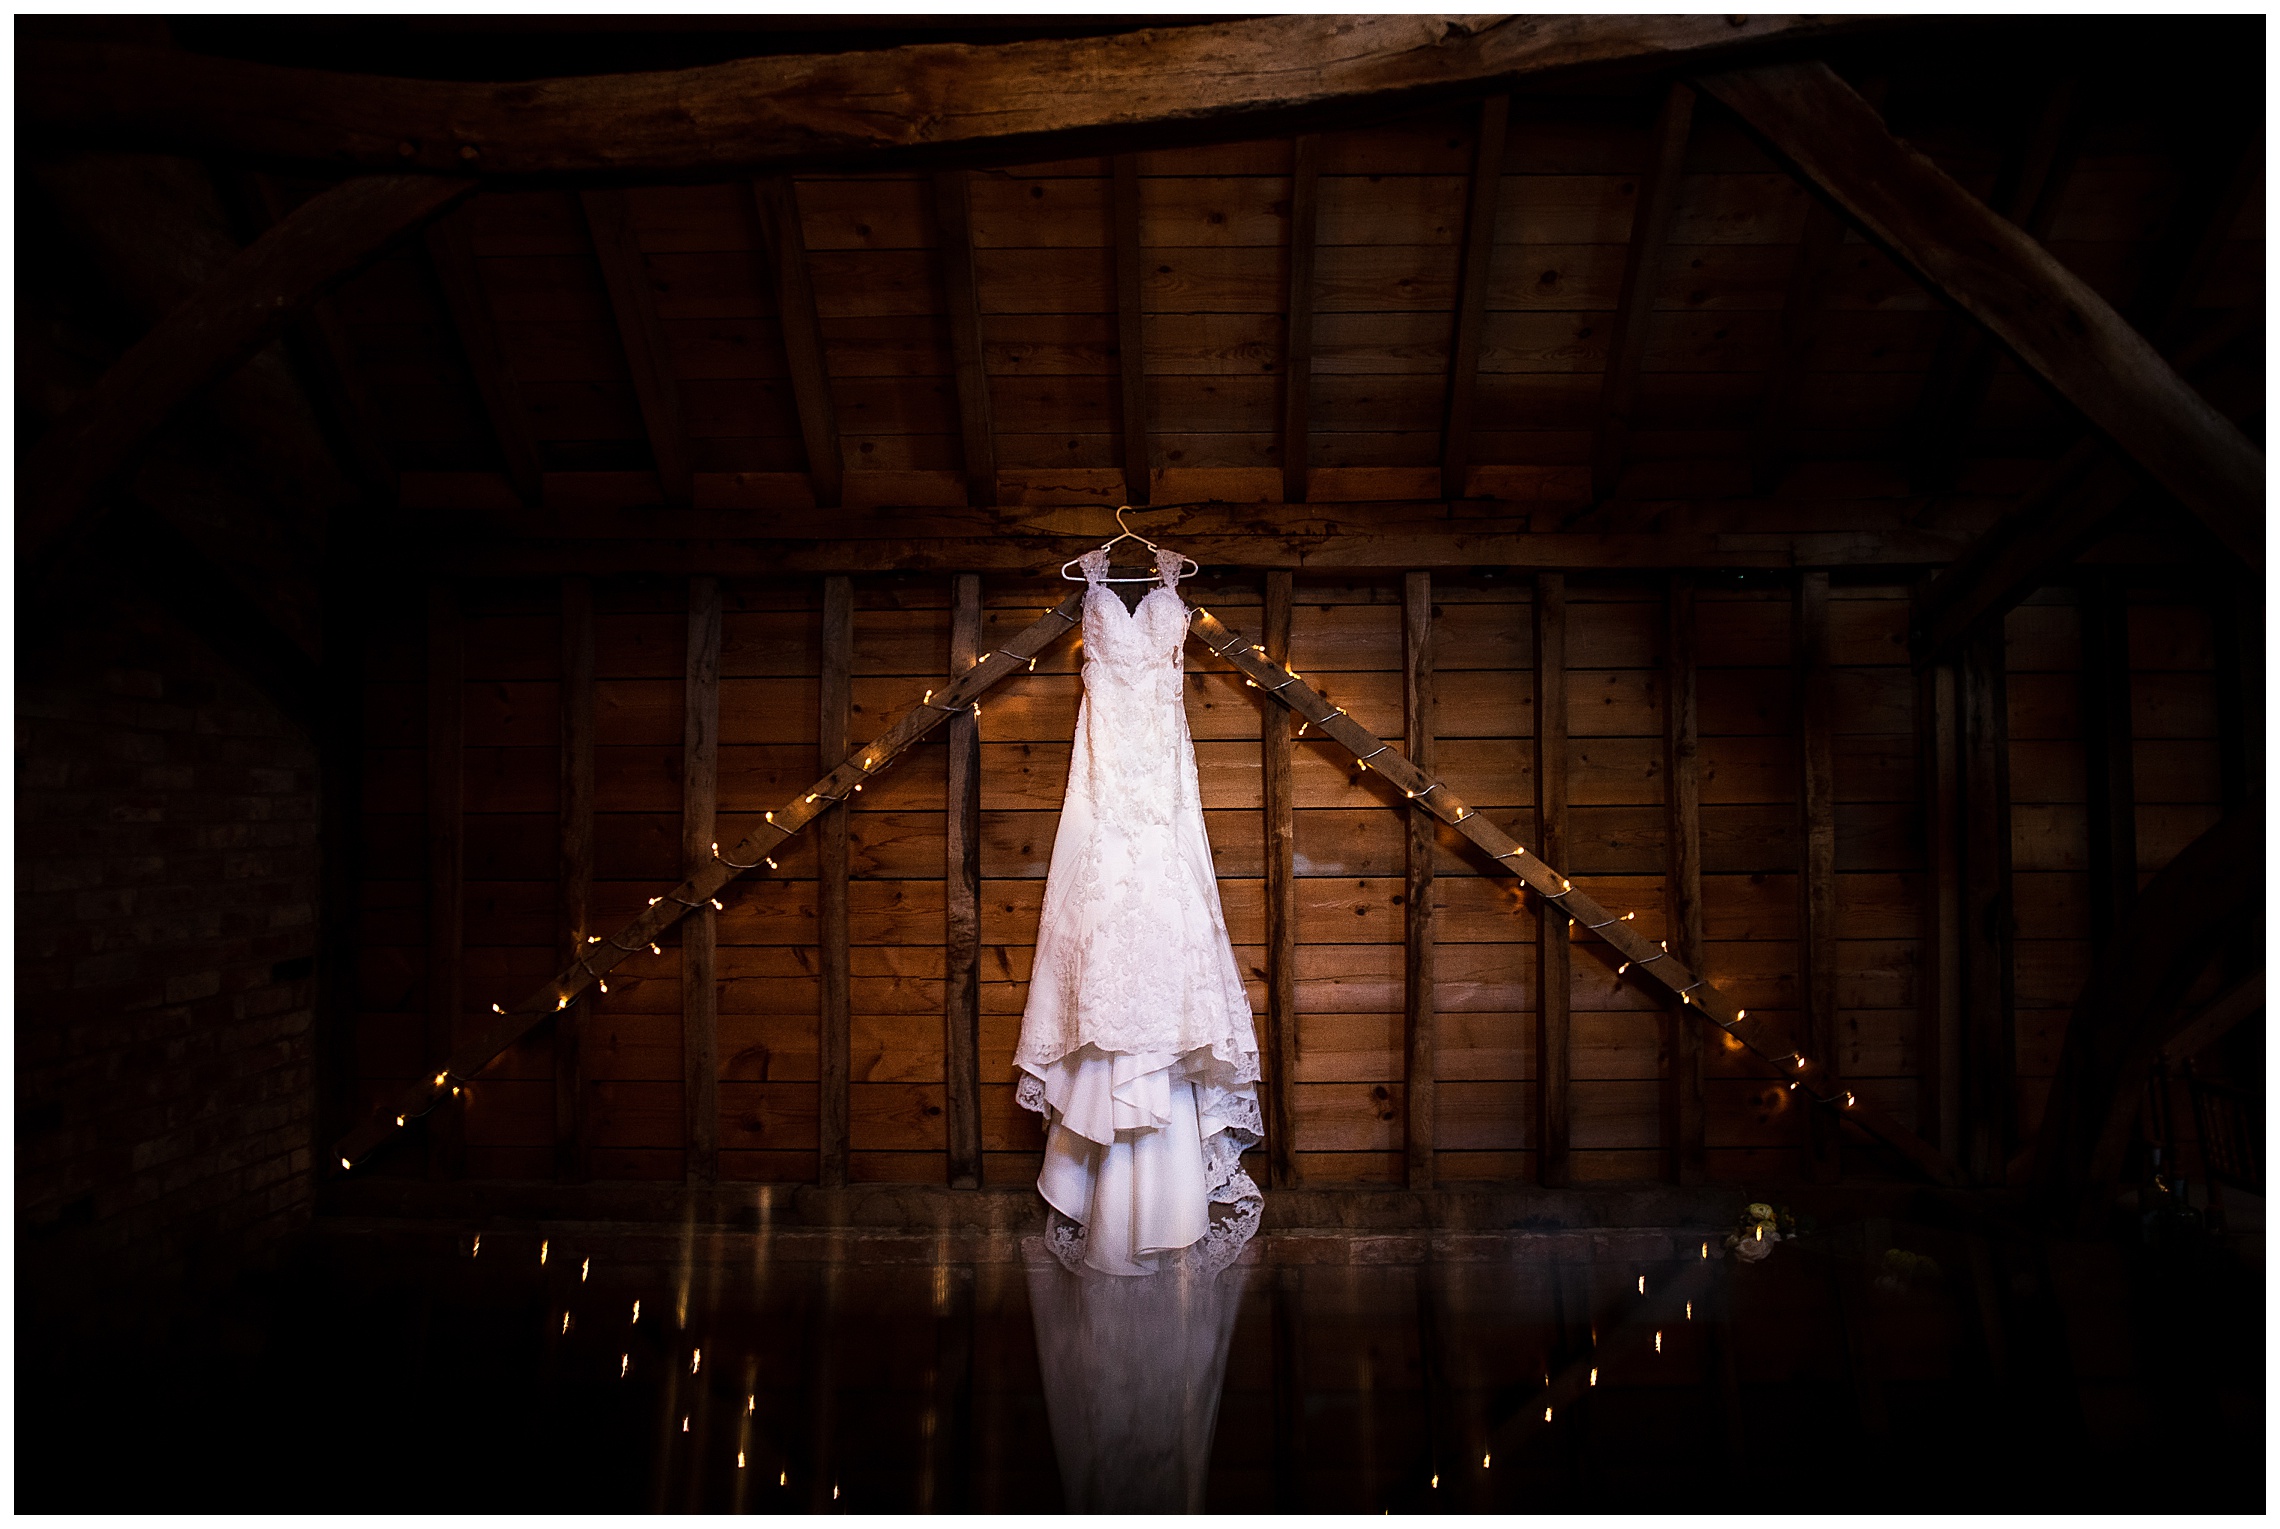 wedding dress surrounded by fairy lights at bassmead manor barns